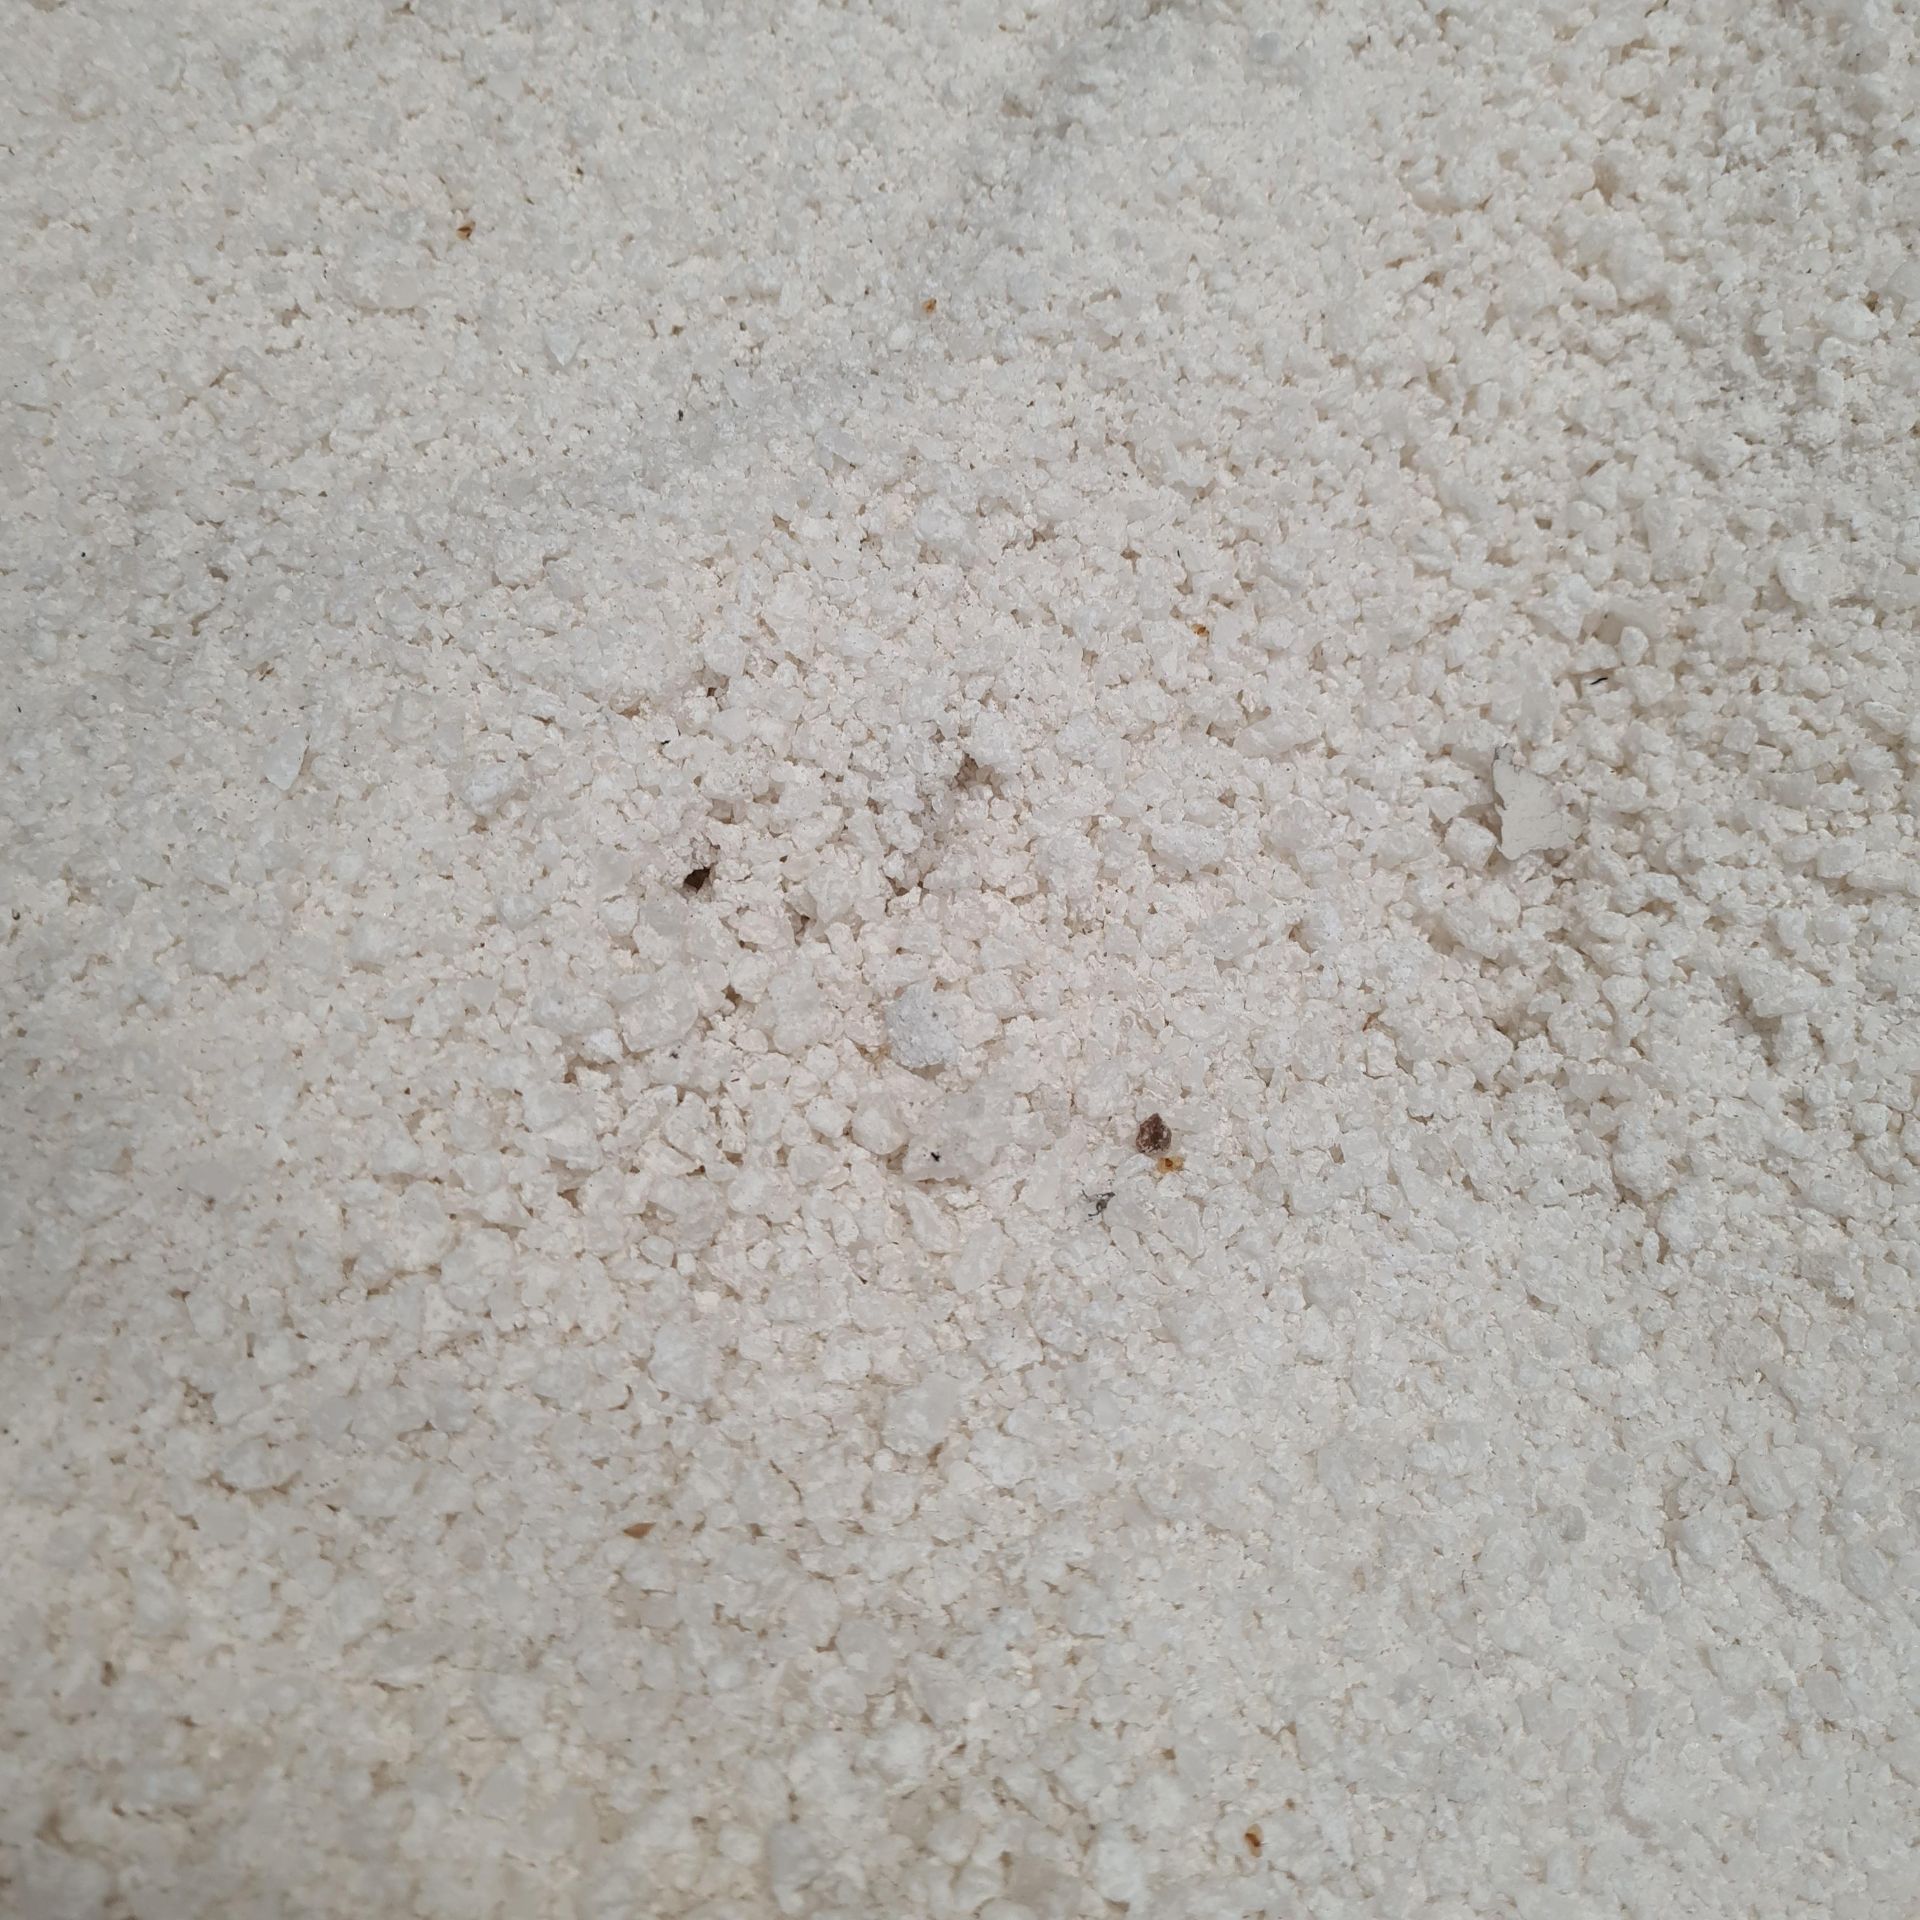 Quantity of Rock Salt, as set out in 1000kg tote b - Image 2 of 2